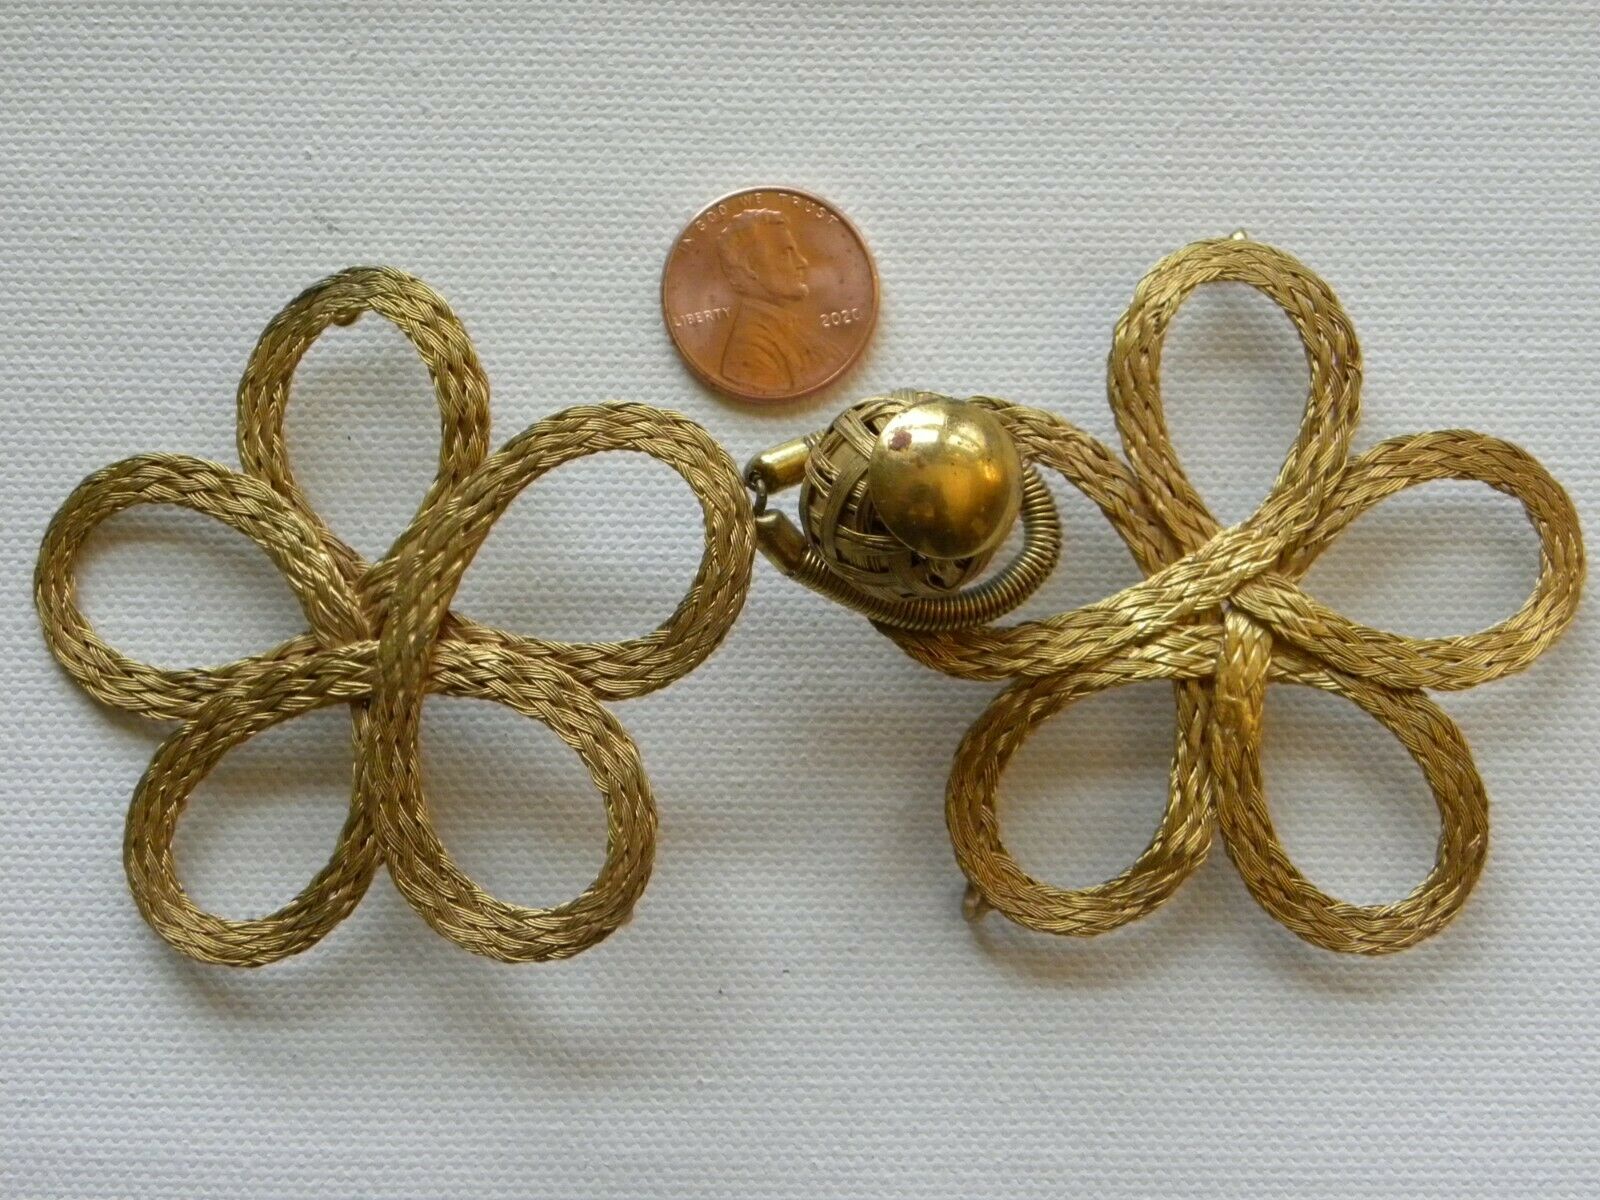 Vintage Metal Cape Cloak Clasp Closure Two Piece Frog Gold Braided Fastener